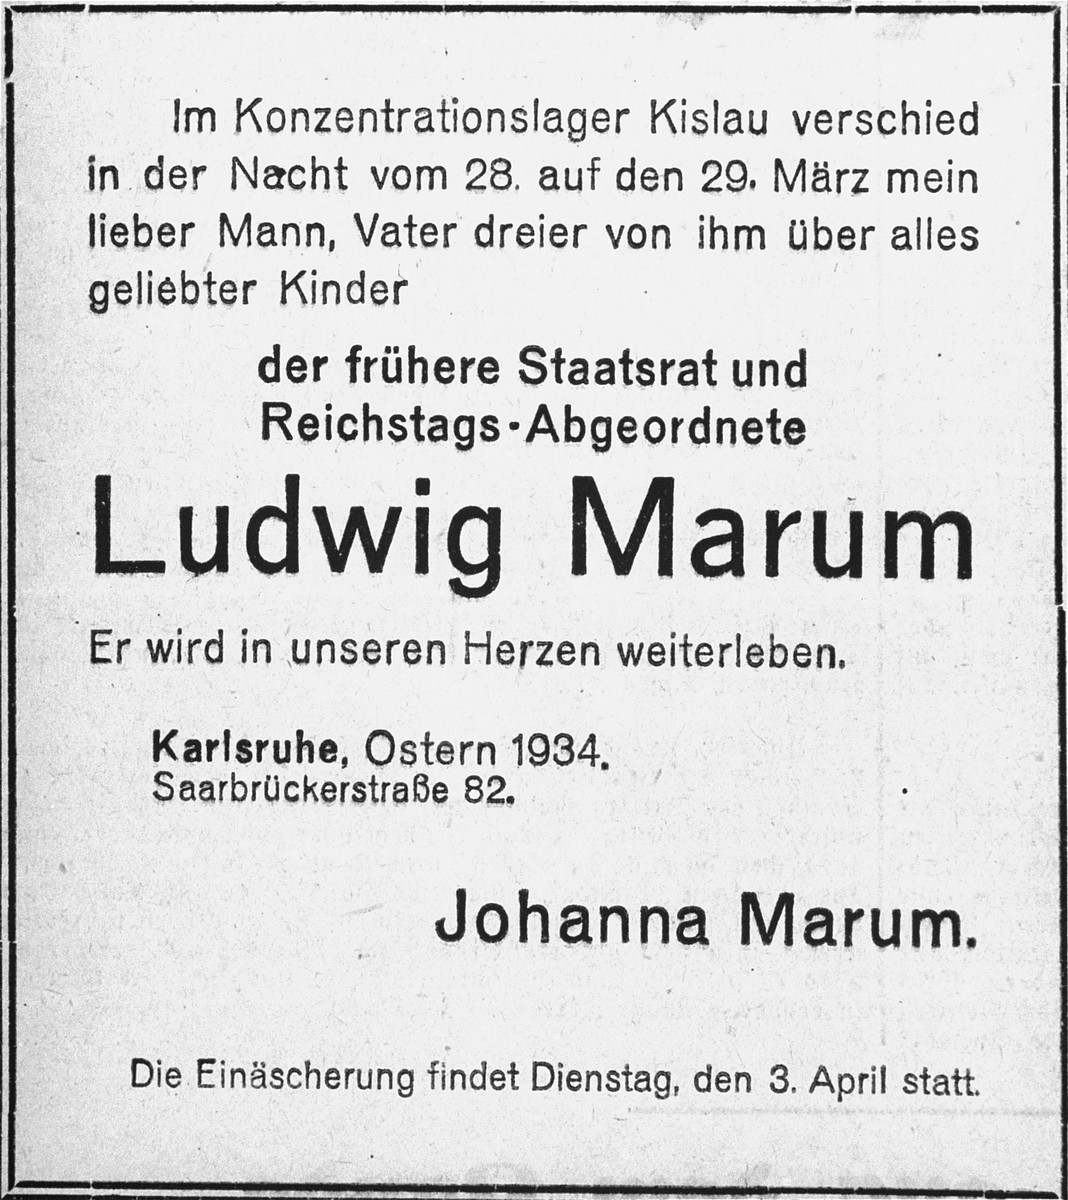 An obituary notice in the Badische Presse for Ludwig Marum.  

The notice reads: "In the Kissau concentration camp on the night of March 28-29, 1934, my dear husband, father of three beloved children died -- former state councillor and member of Parliament: Ludwig Marum, who will always remain in our hearts.  The cremation will take place on Tuesday April 3, 1934."